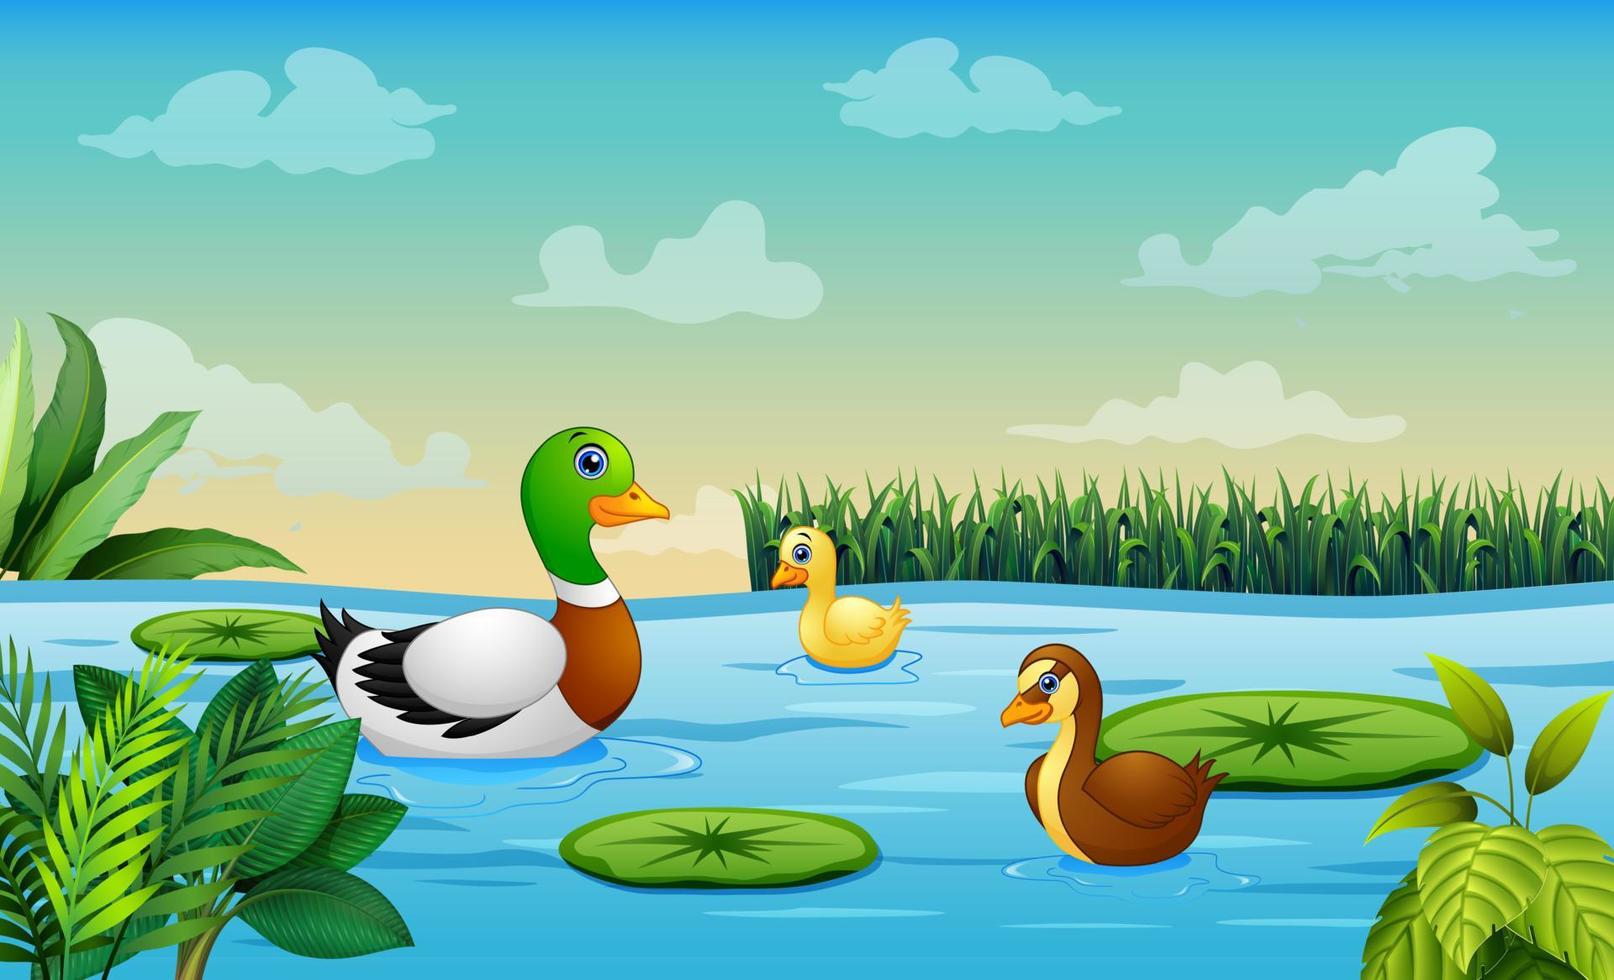 Illustration of a mother duck with her ducklings in the river vector